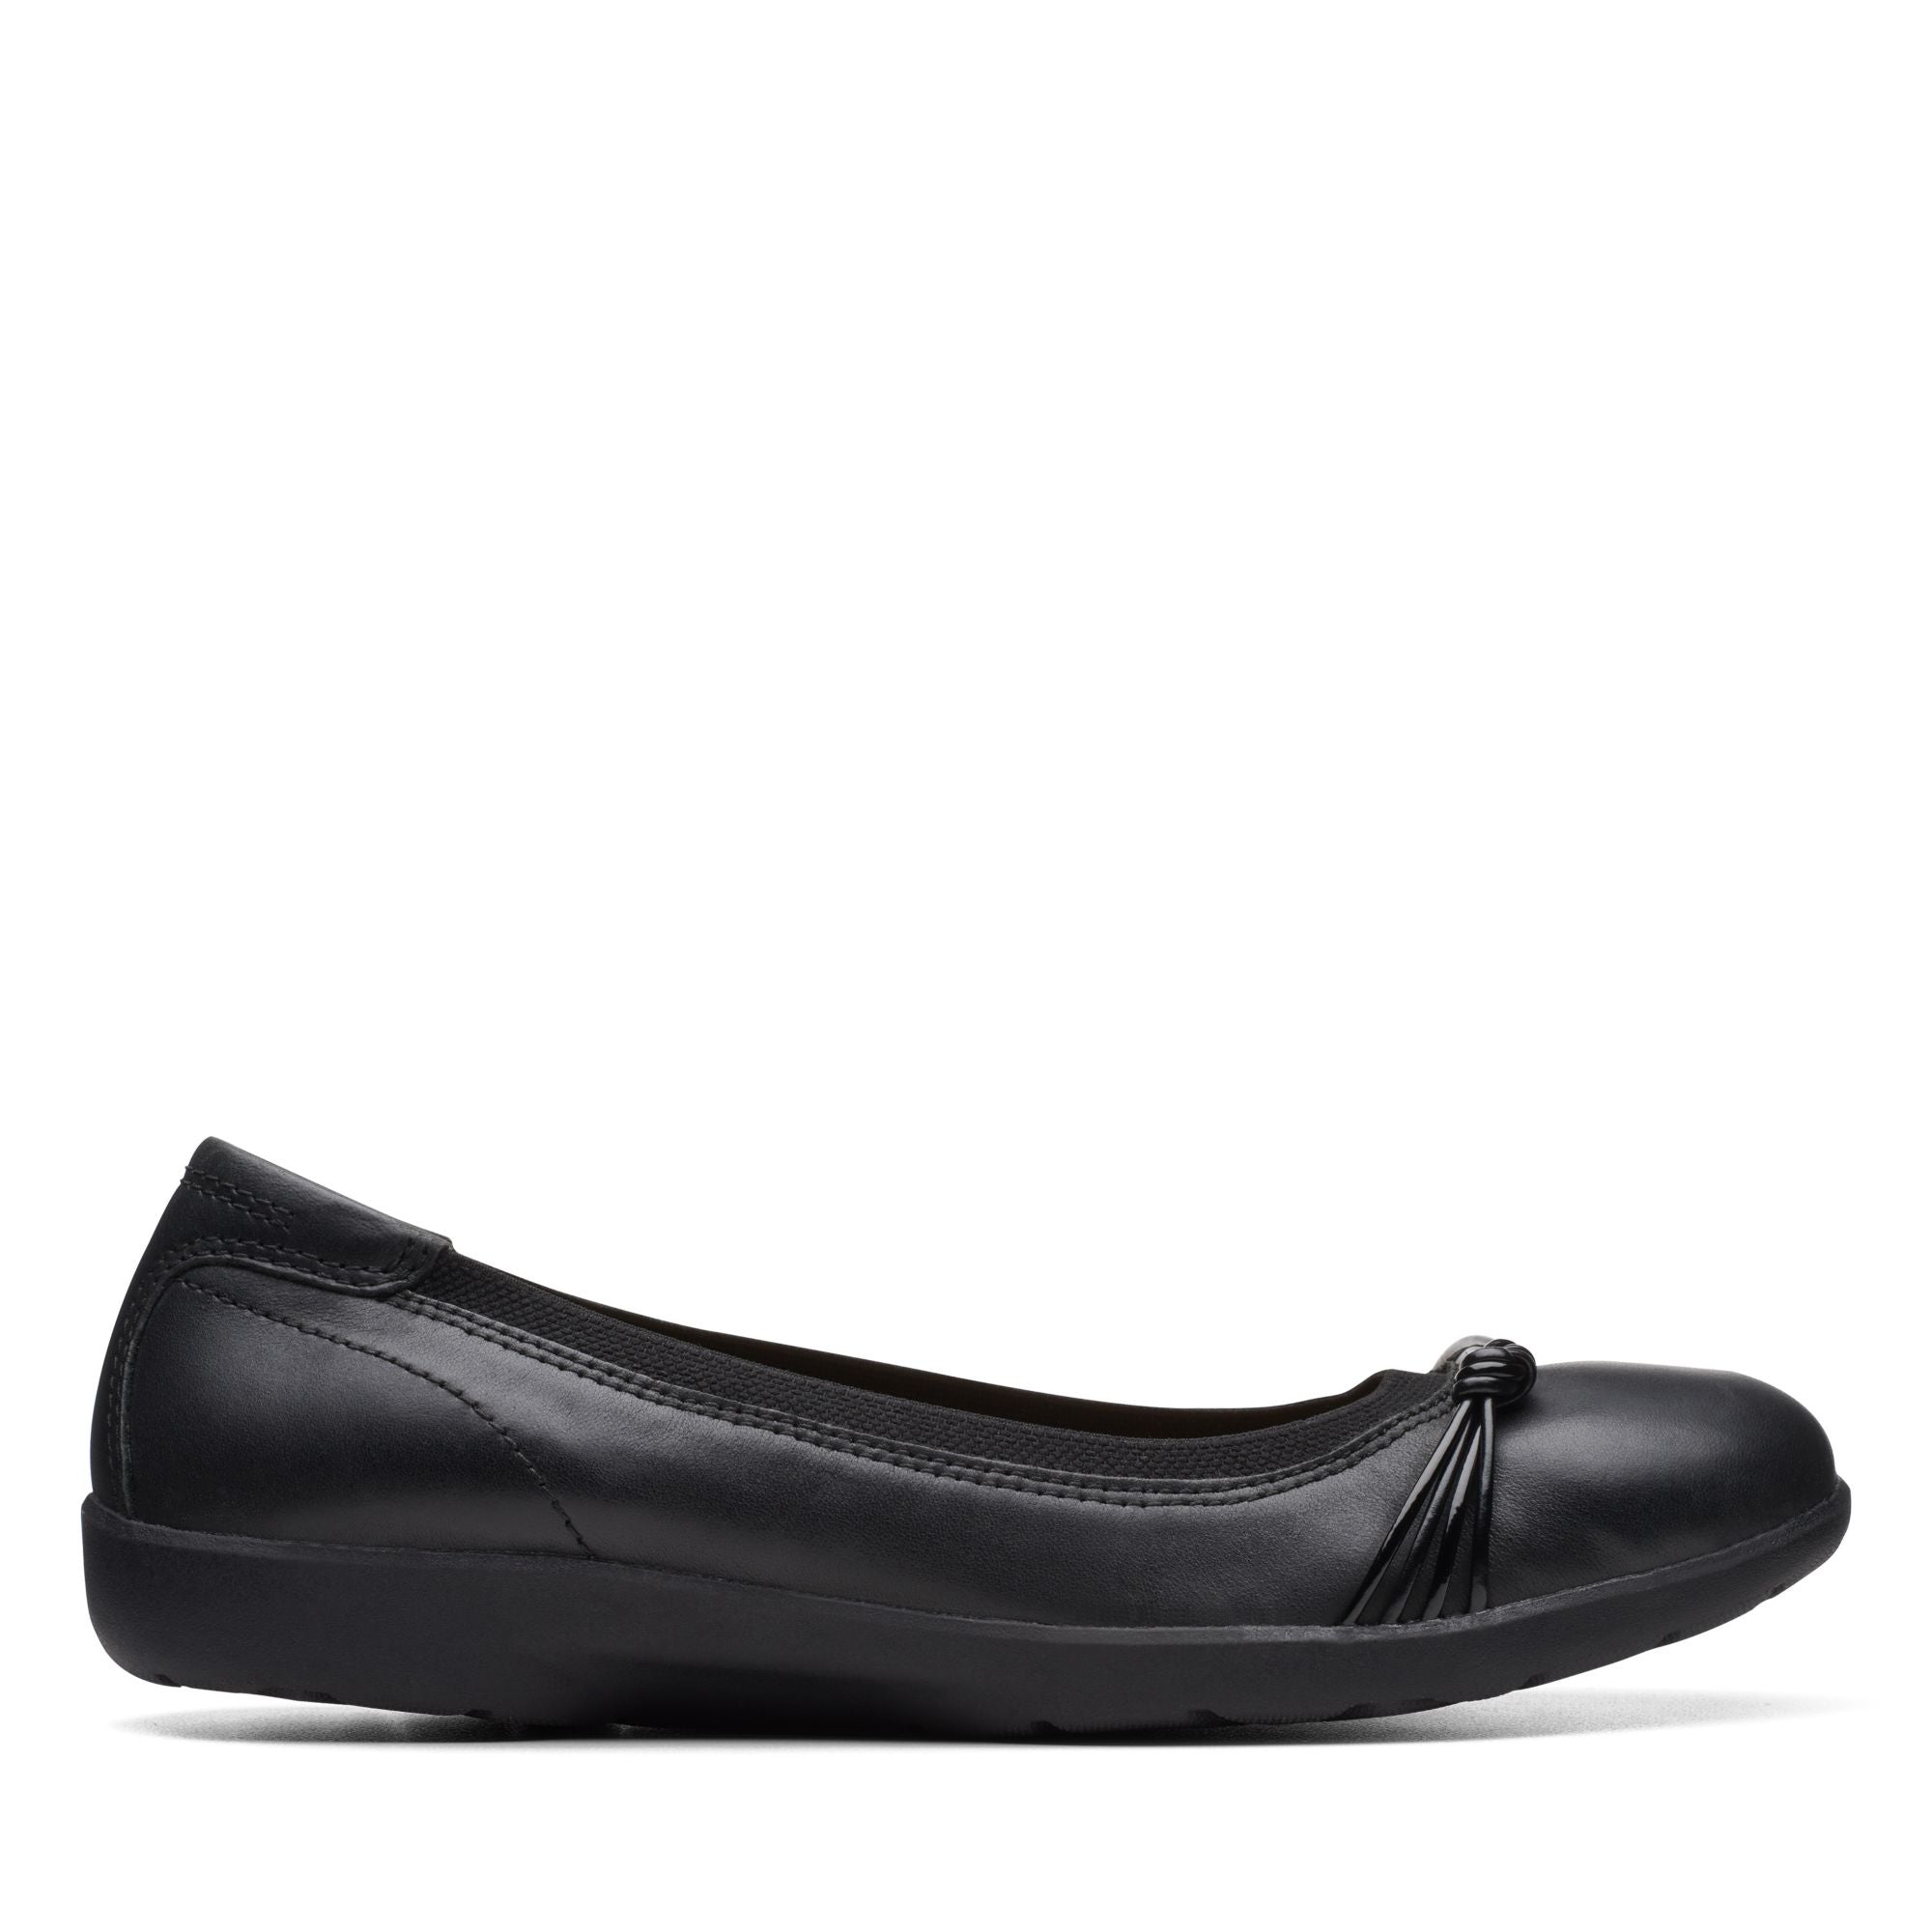 Meadow Rae Black Leather - Clarks Canada Official Site | Clarks Shoes